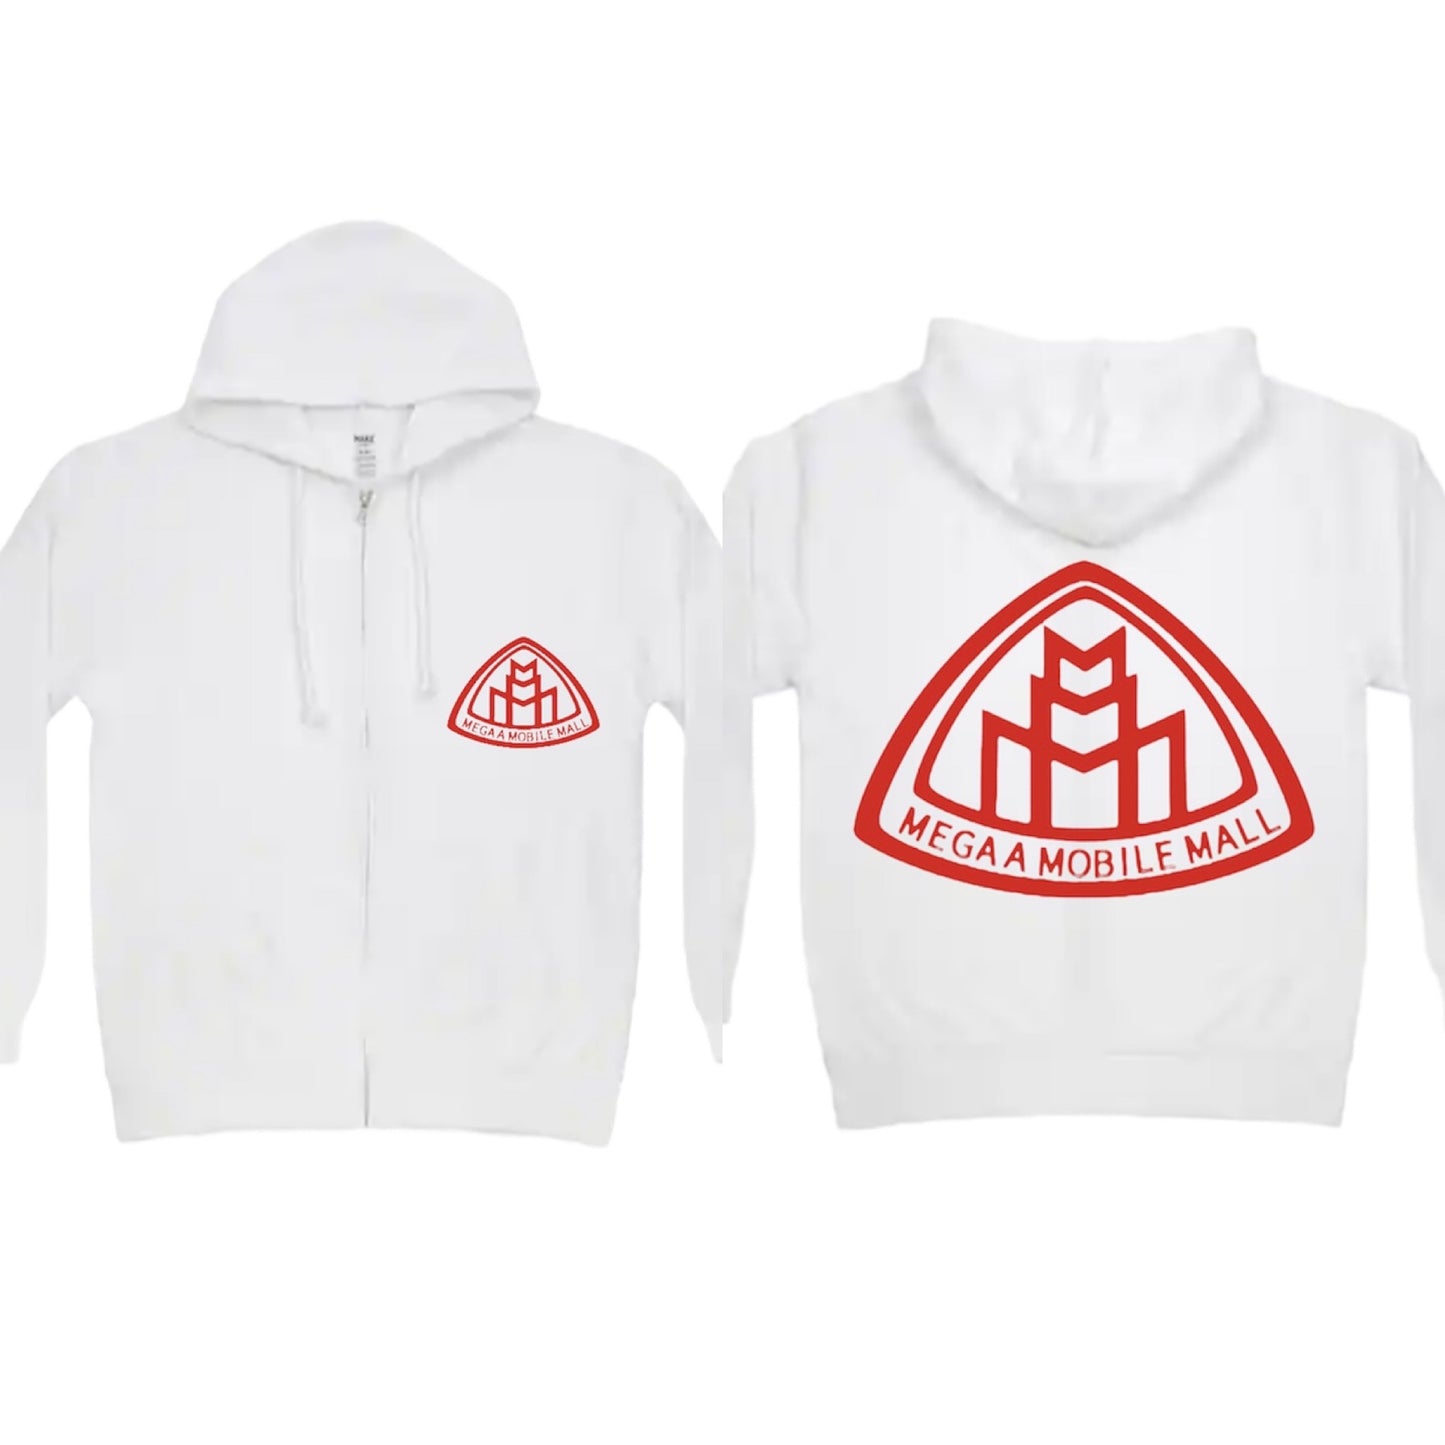 megaamobilemall white zip up hoodie with red logo